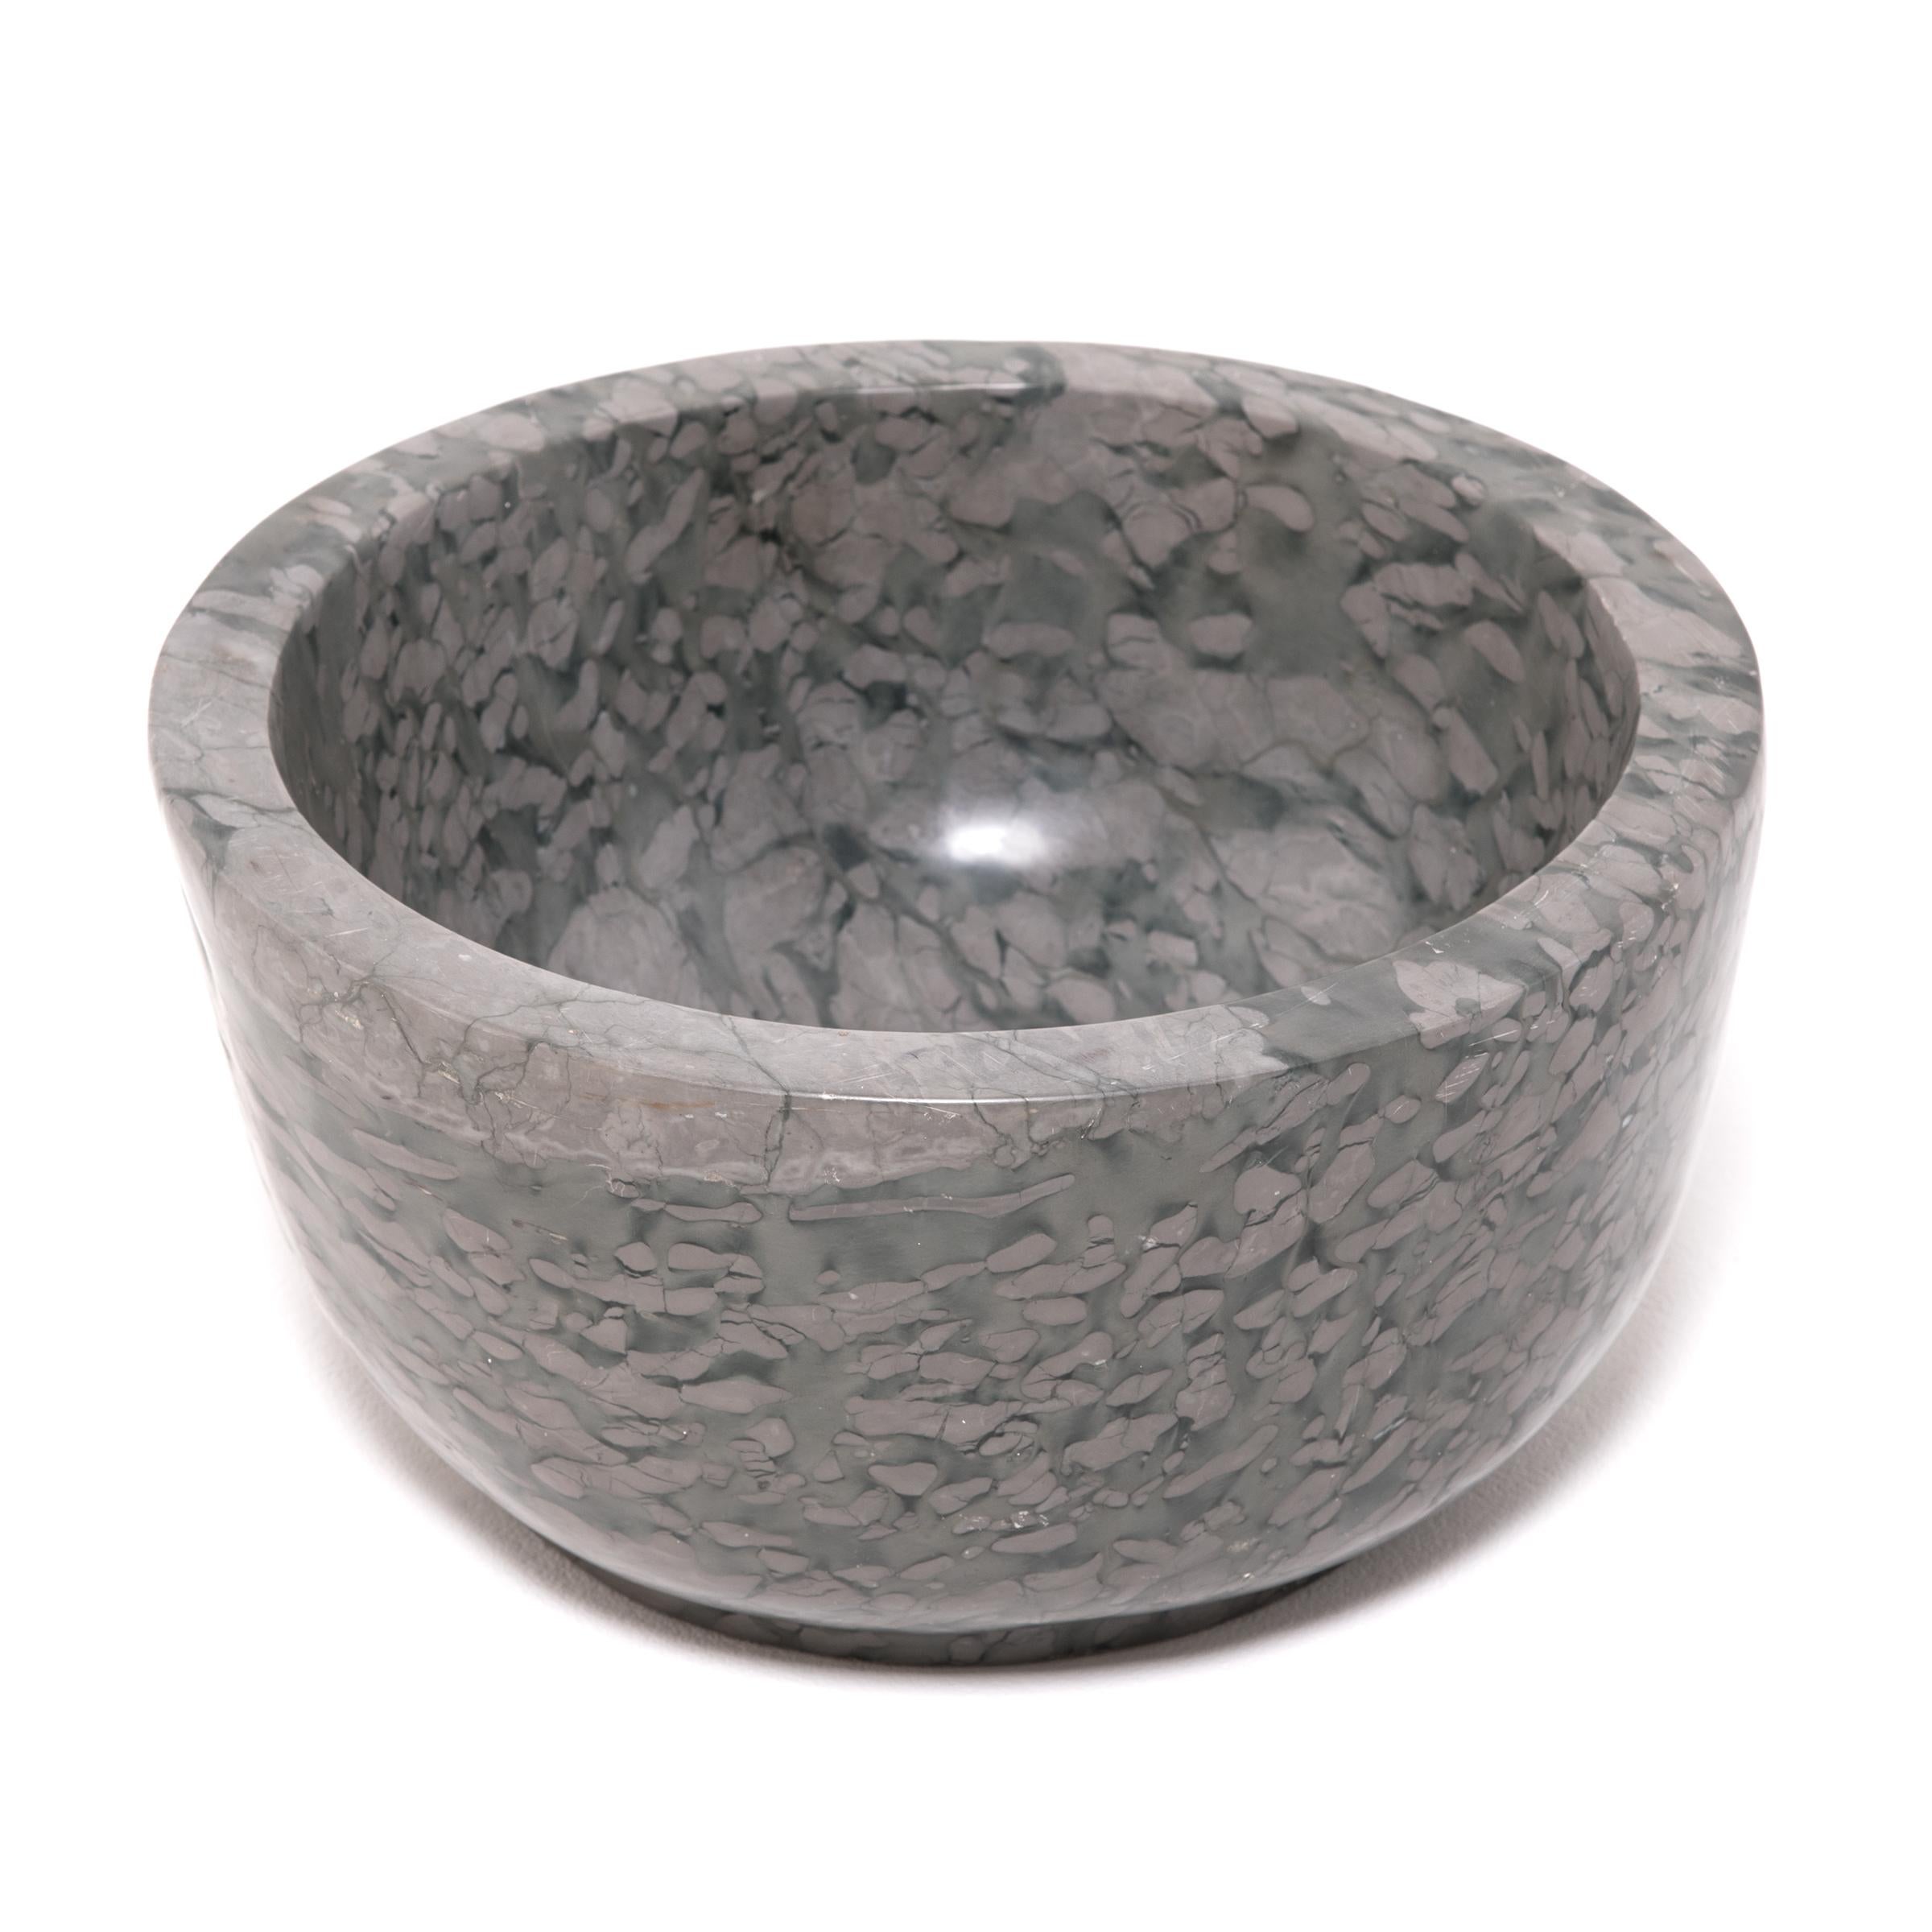 A clean-lined interpretation of an ancient form, this footed basin was hand carved by artisans in China's Shandong province. It looks as if it were meticulously painted but the mesmerizing pattern is actually inherent to the zhenzhu stone, a